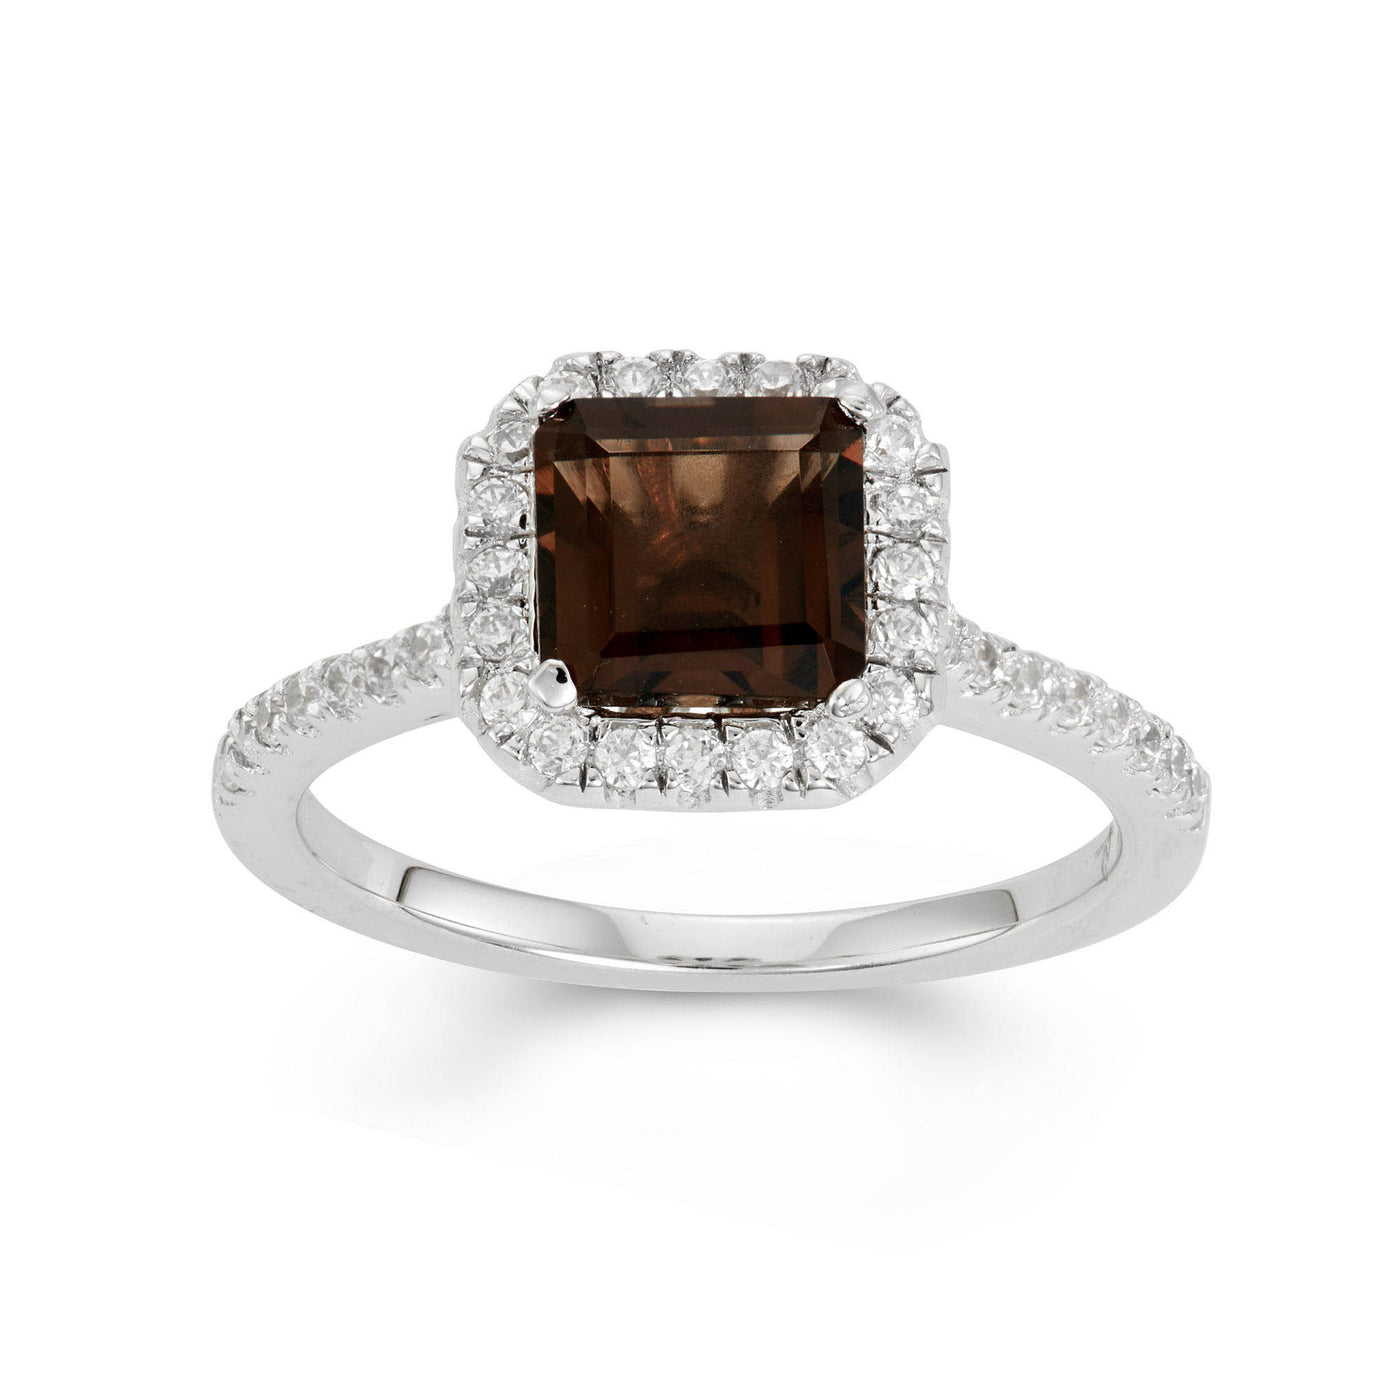 Rebecca Sloane Silver Ring With 8mm Square Cut Smoky Topaz